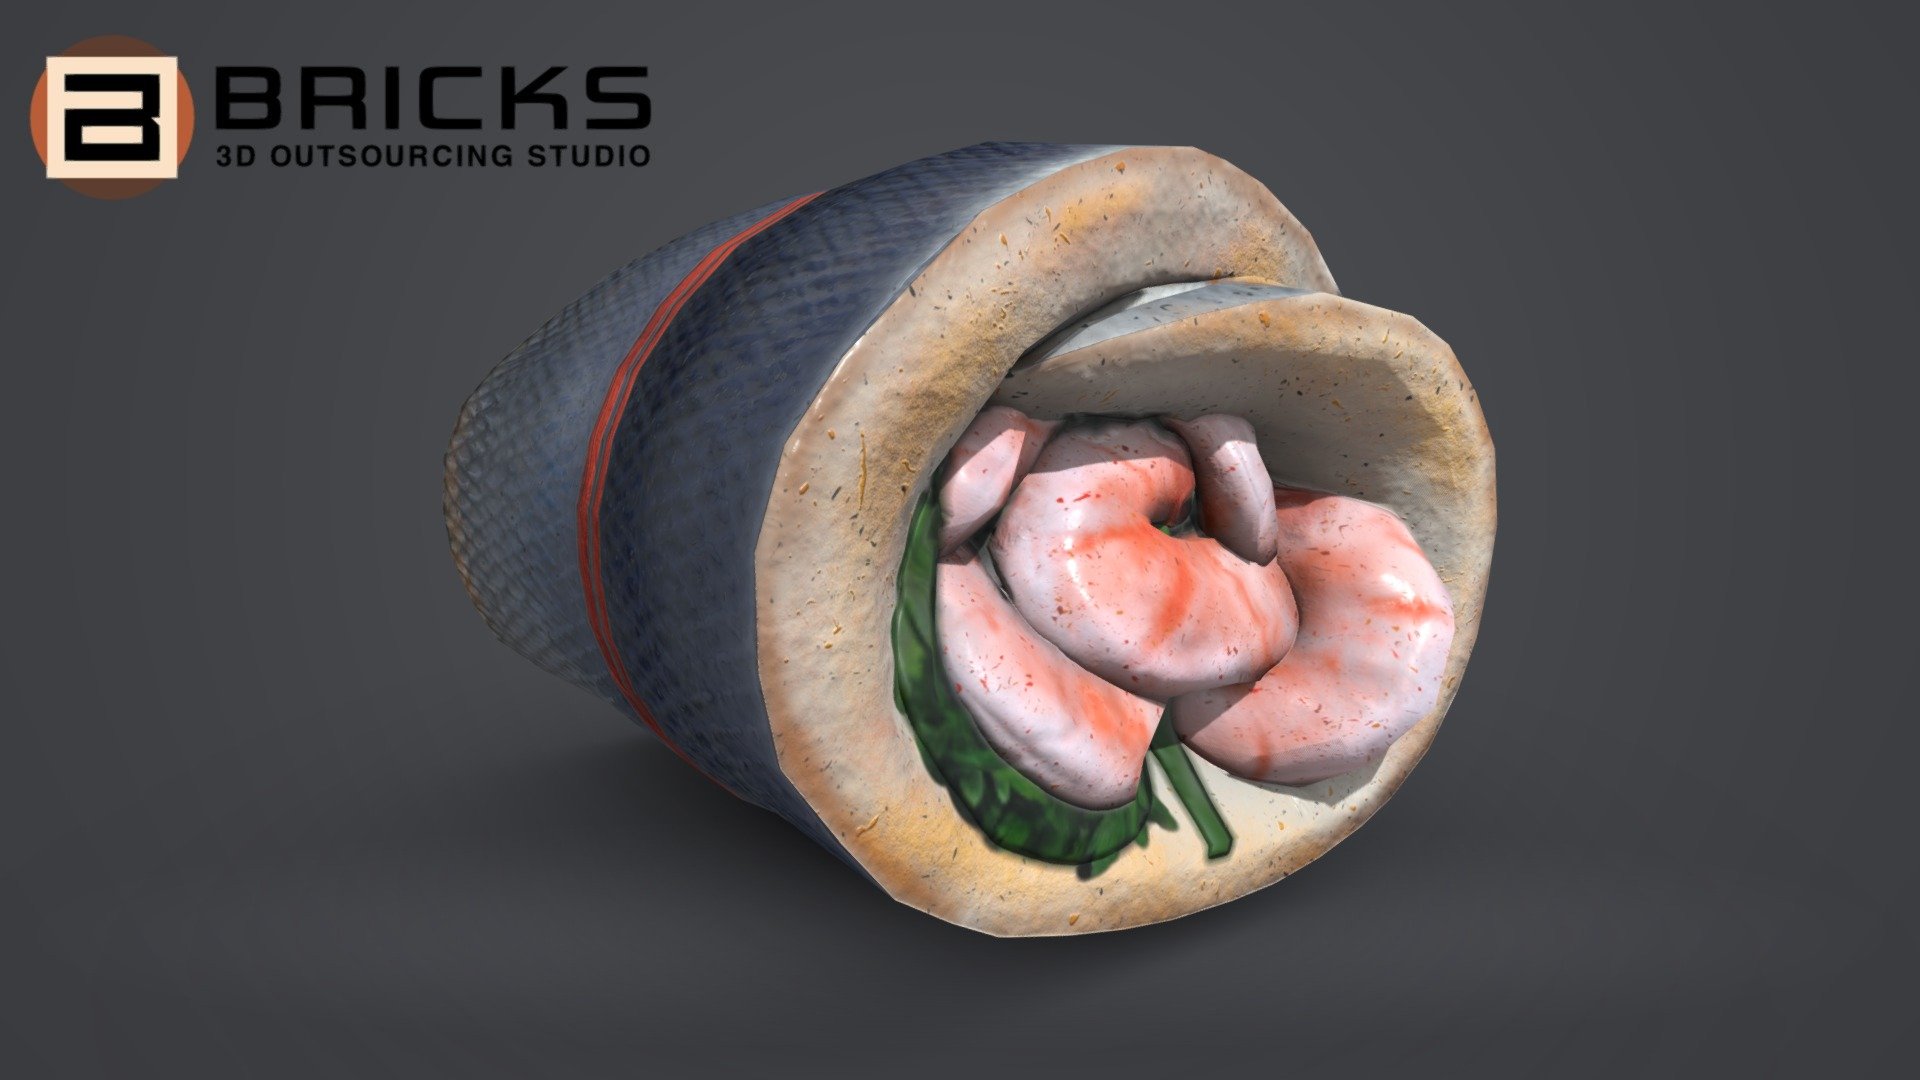 PBR Food Asset:
SeaBassPrawns
Polycount: 1058
Vertex count: 672
Texture Size: 2048px x 2048px
Normal: OpenGL

If you need any adjust in file please contact us: team@bricks3dstudio.com

Hire us: tringuyen@bricks3dstudio.com
Here is us: https://www.bricks3dstudio.com/
        https://www.artstation.com/bricksstudio
        https://www.facebook.com/Bricks3dstudio/
        https://www.linkedin.com/in/bricks-studio-b10462252/ - SeaBassPrawns - Buy Royalty Free 3D model by Bricks Studio (@bricks3dstudio) 3d model